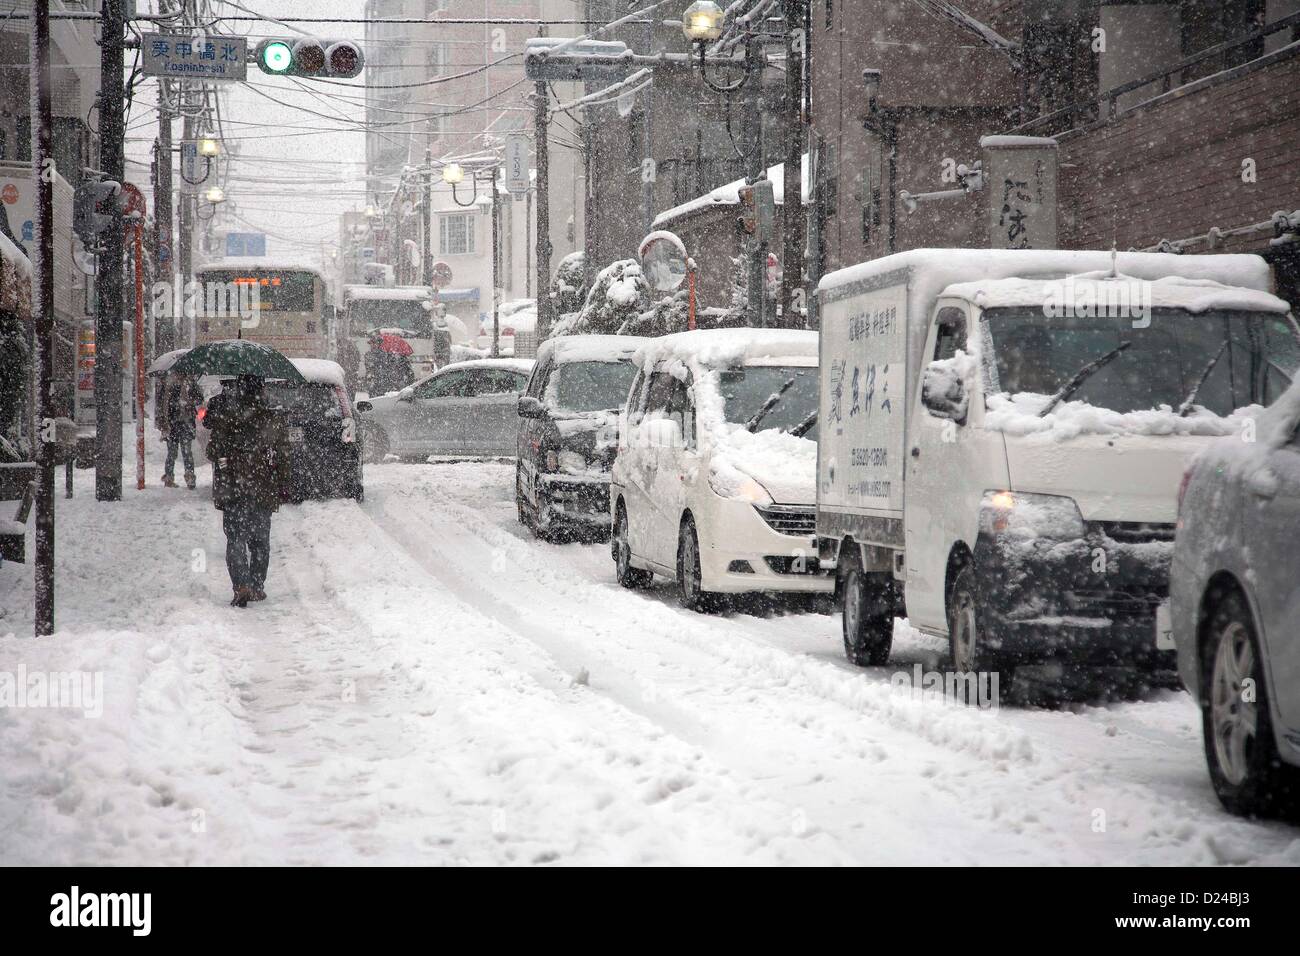 Tokyo hit by heaviest snow since 2014 - The Japan Times